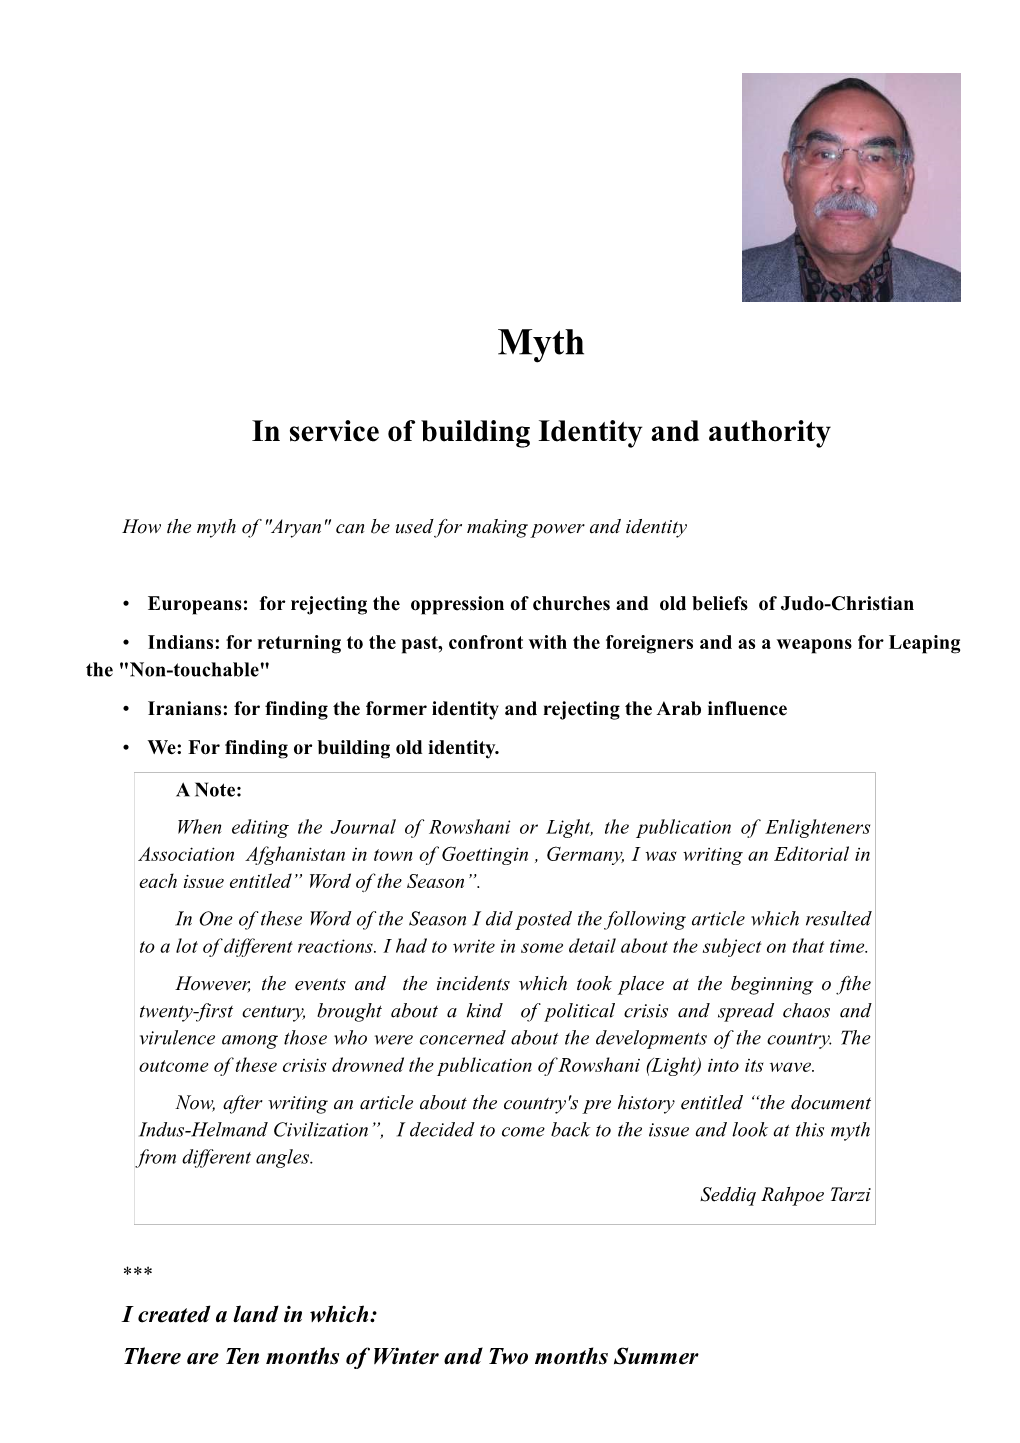 Myth in Service of Building Identity and Authority